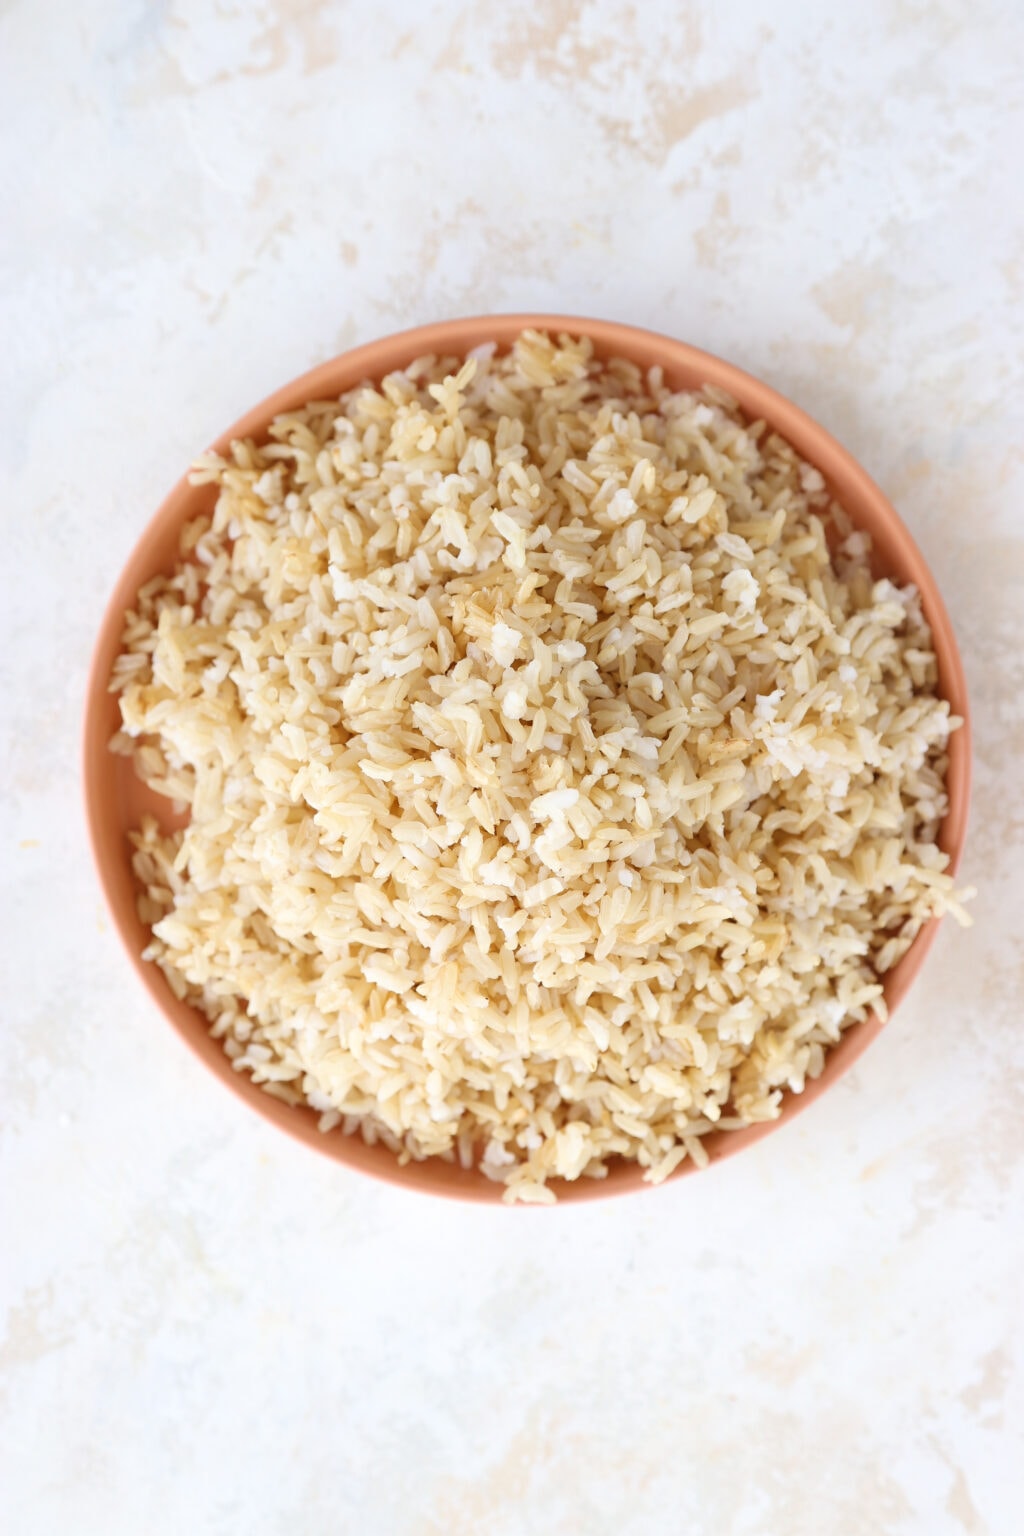 A brown rimmed plate is filled with cooked brown rice.